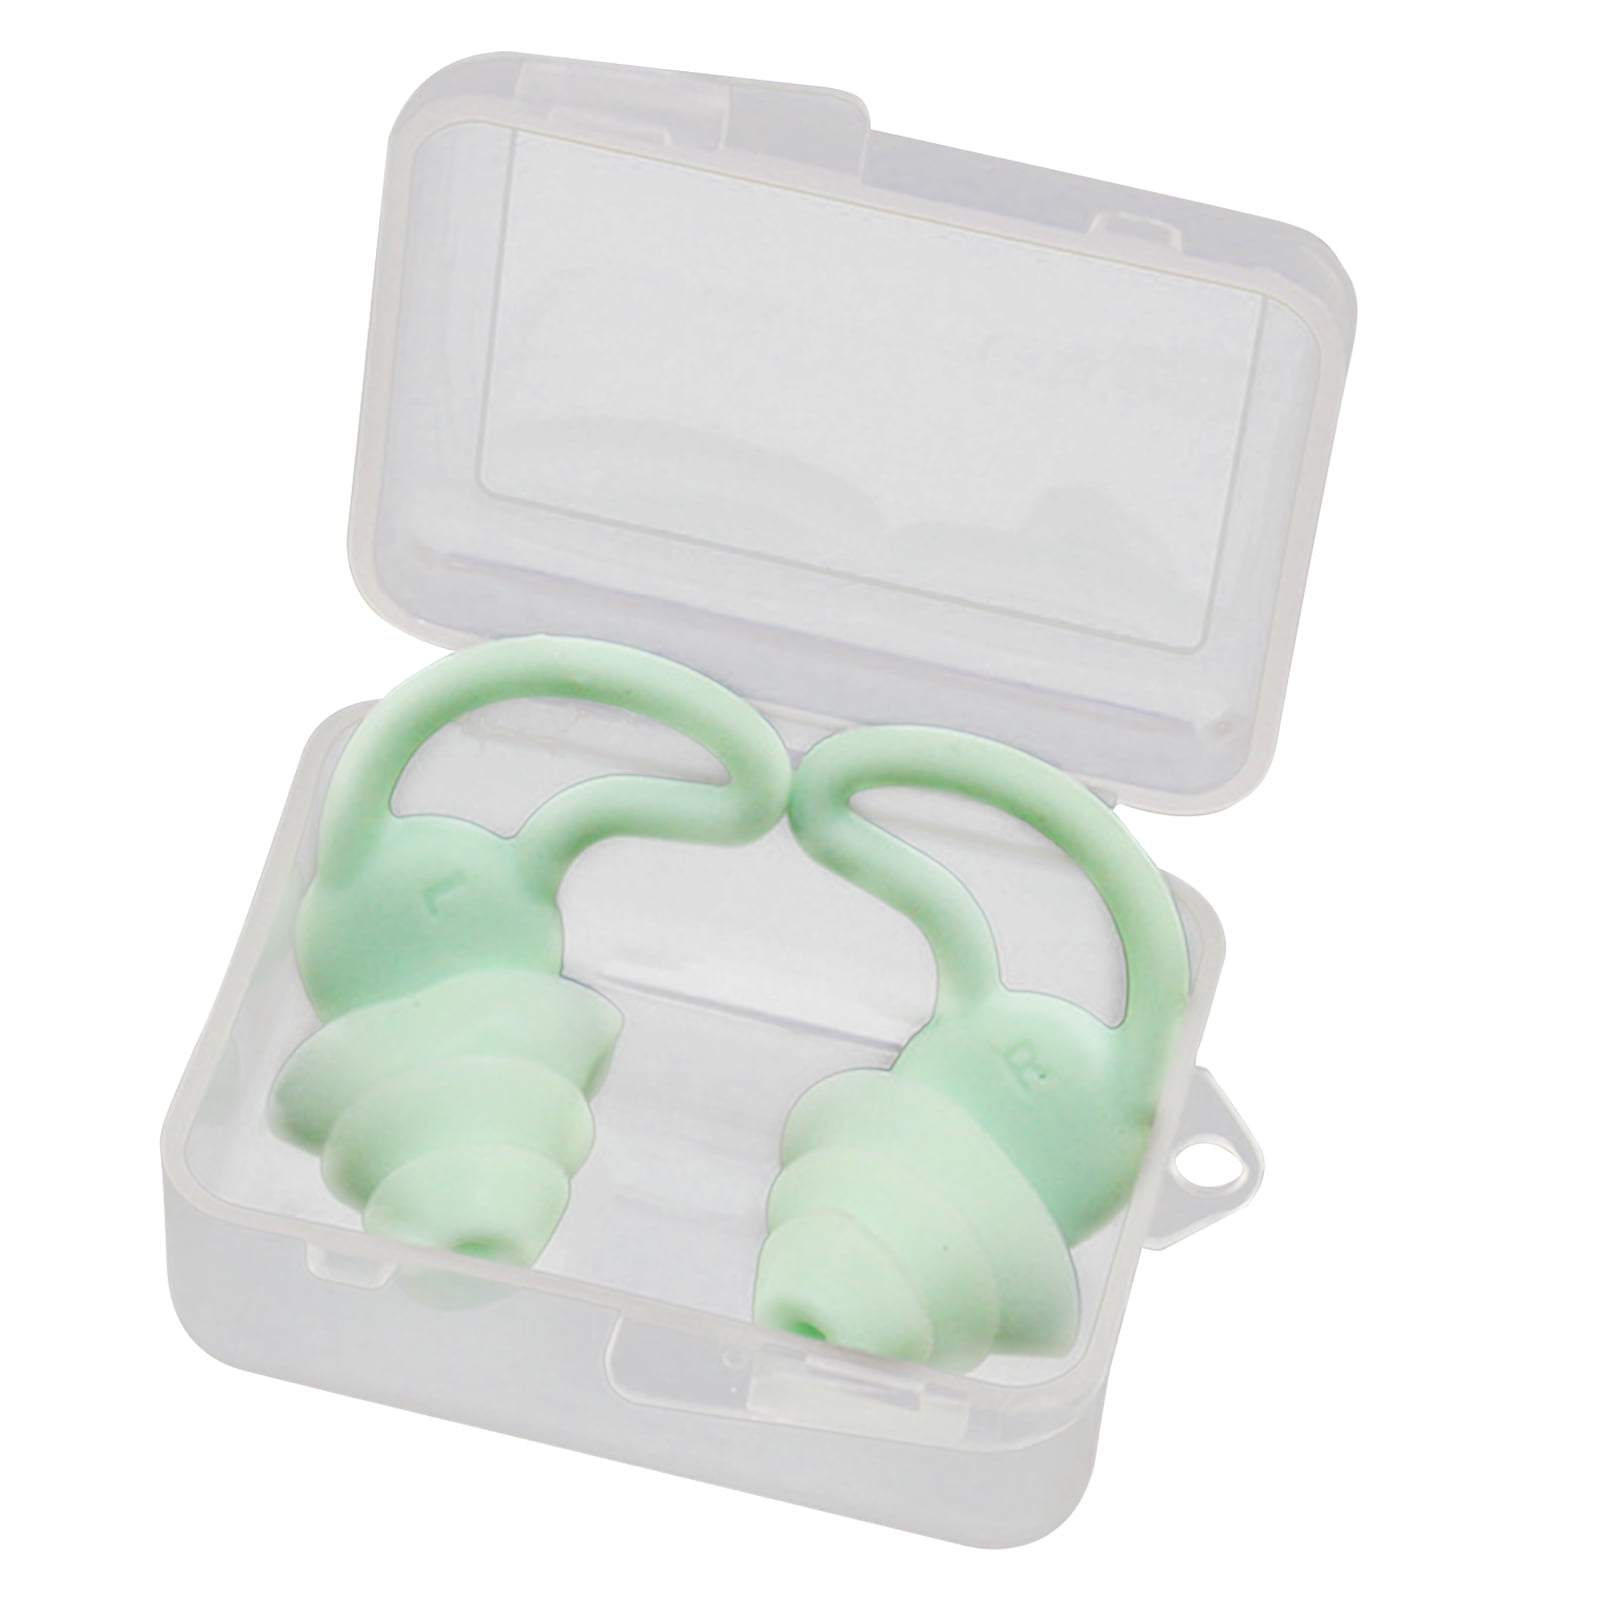 Showering Mpow 10 Pairs Swimming Ear Plugs with Storage Box SNR 28dB Moldable Silicone Ear Plug Working-Green Water-Block Ear Plug for Swimming Waterproof Swim Earplugs Adults Surfing Sleeping